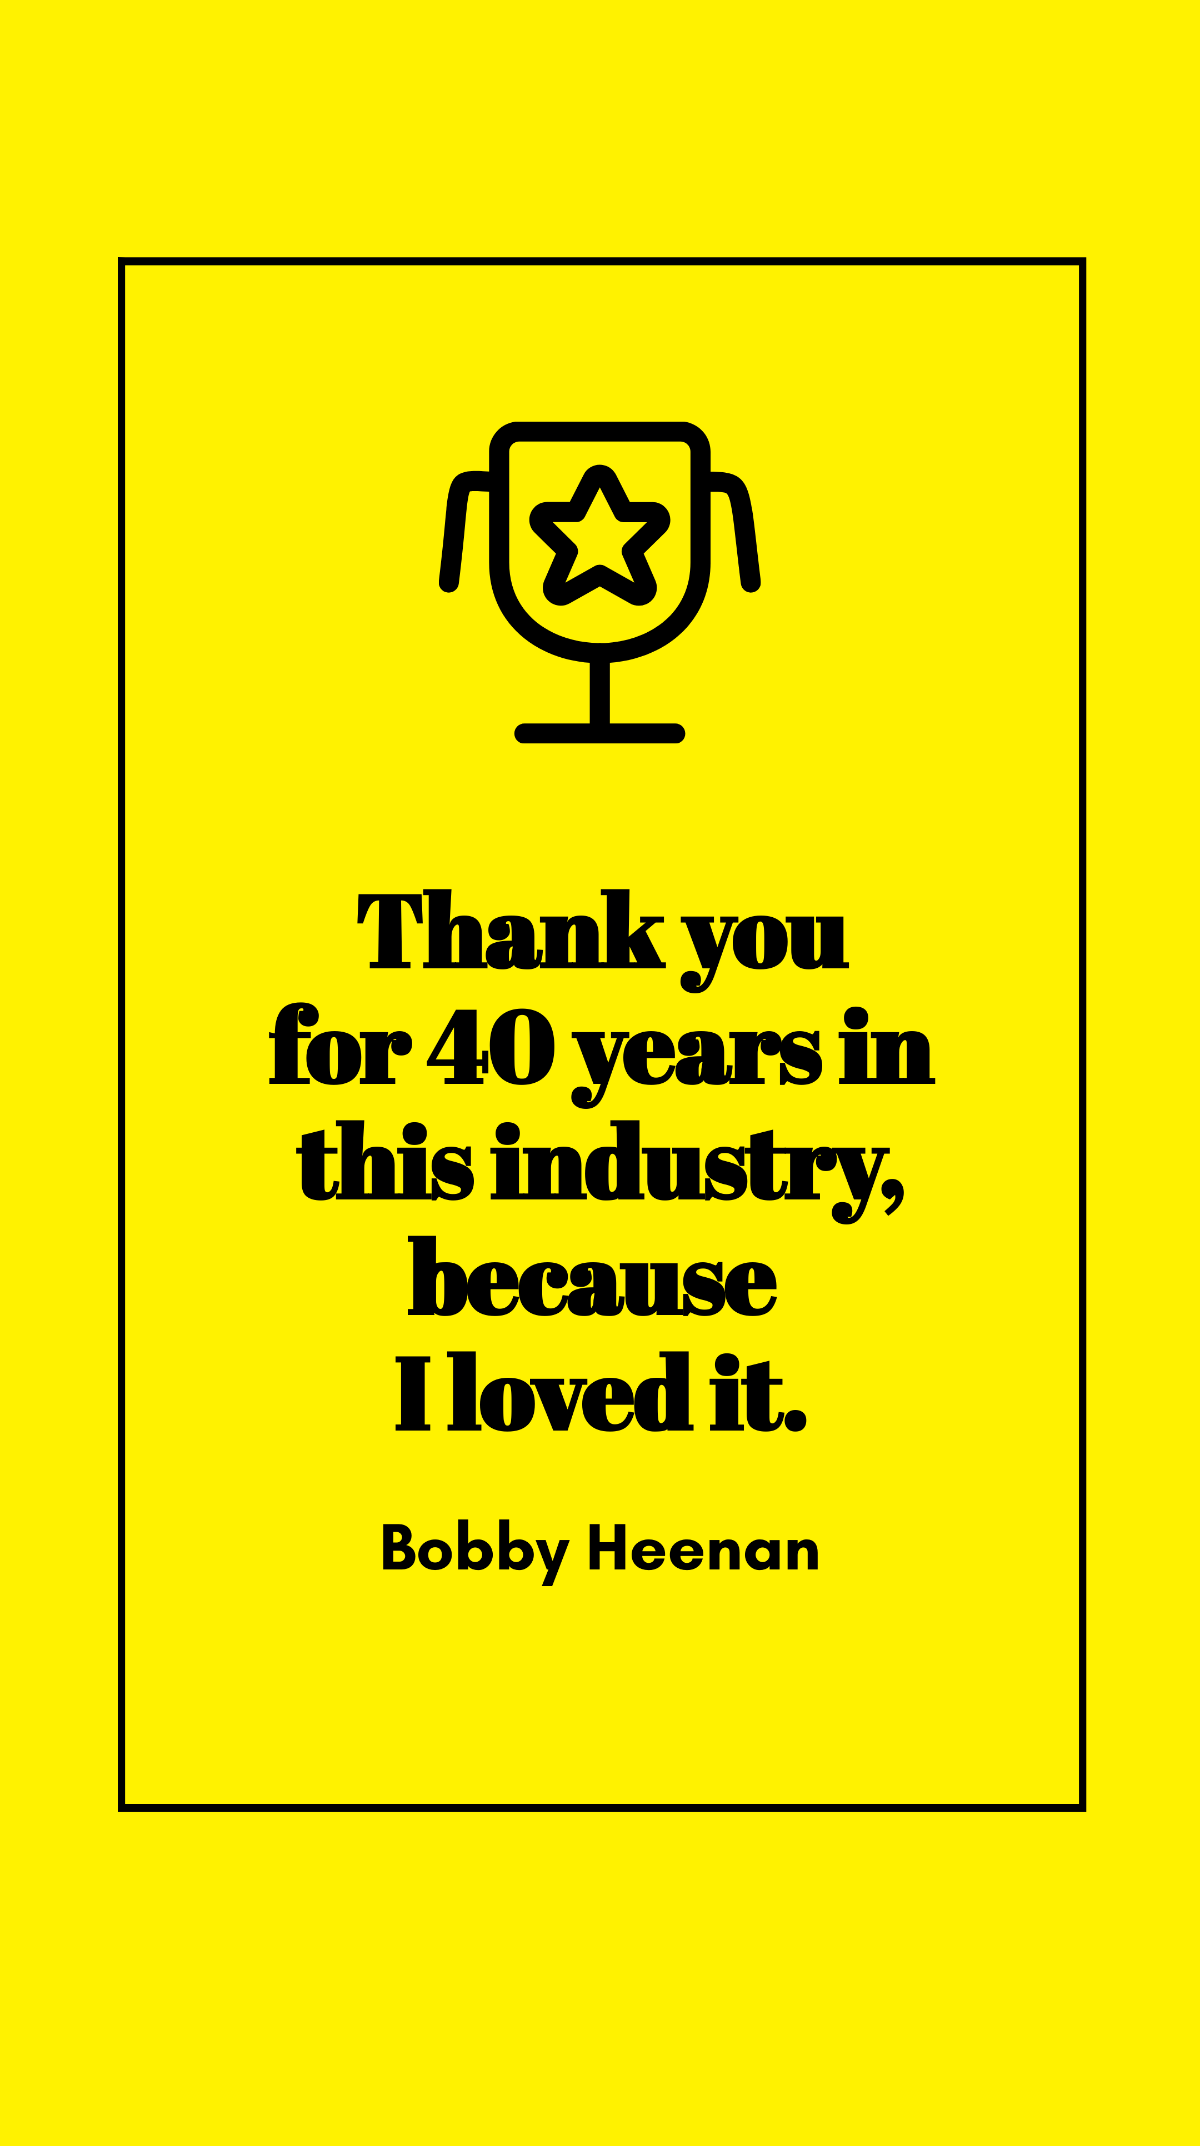 Bobby Heenan - Thank you for 40 years in this industry, because I loved it. Template